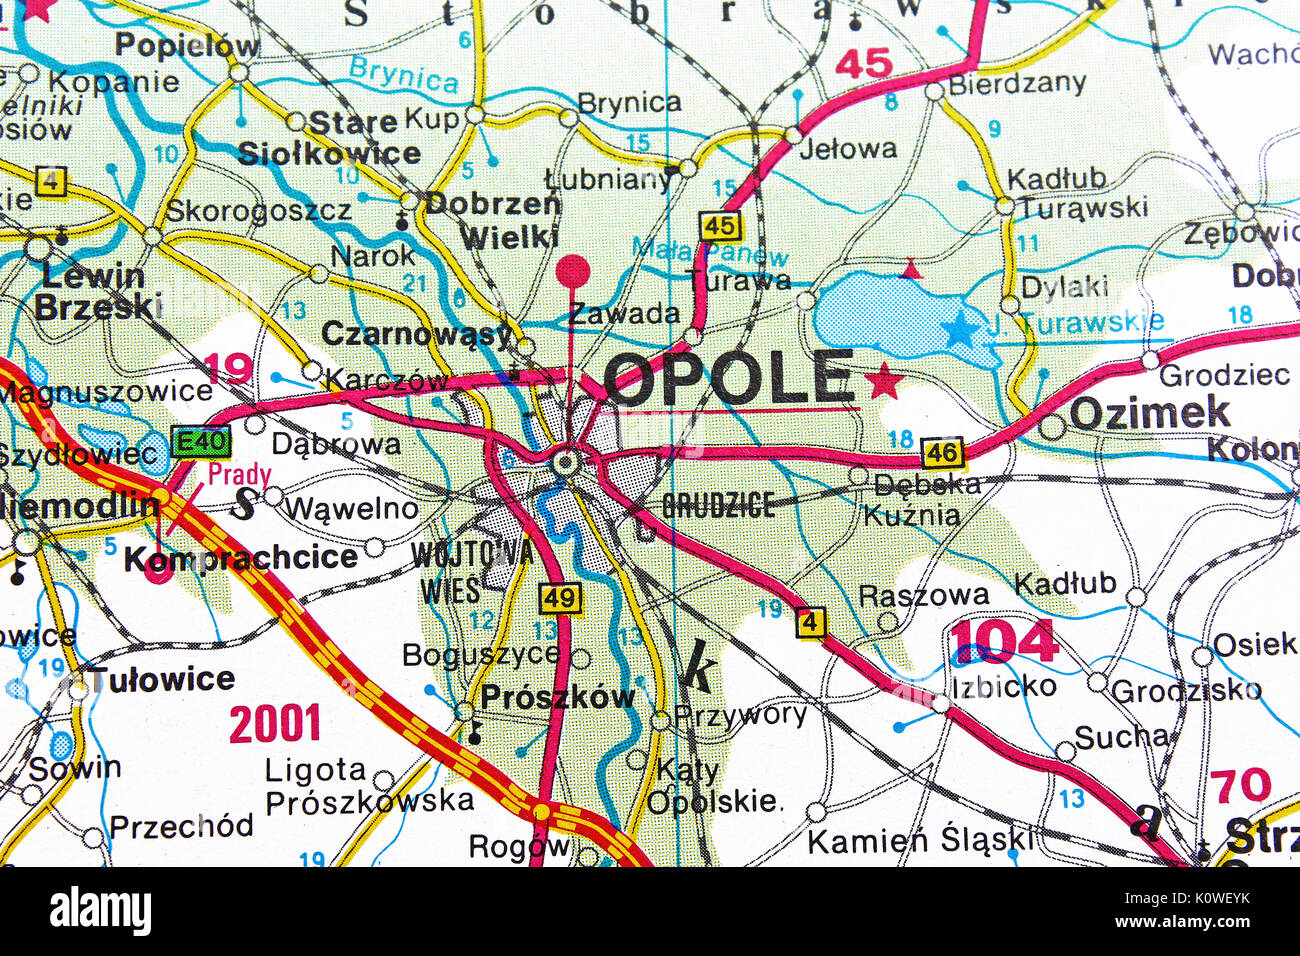 Opole map city map road map. Stock Photo